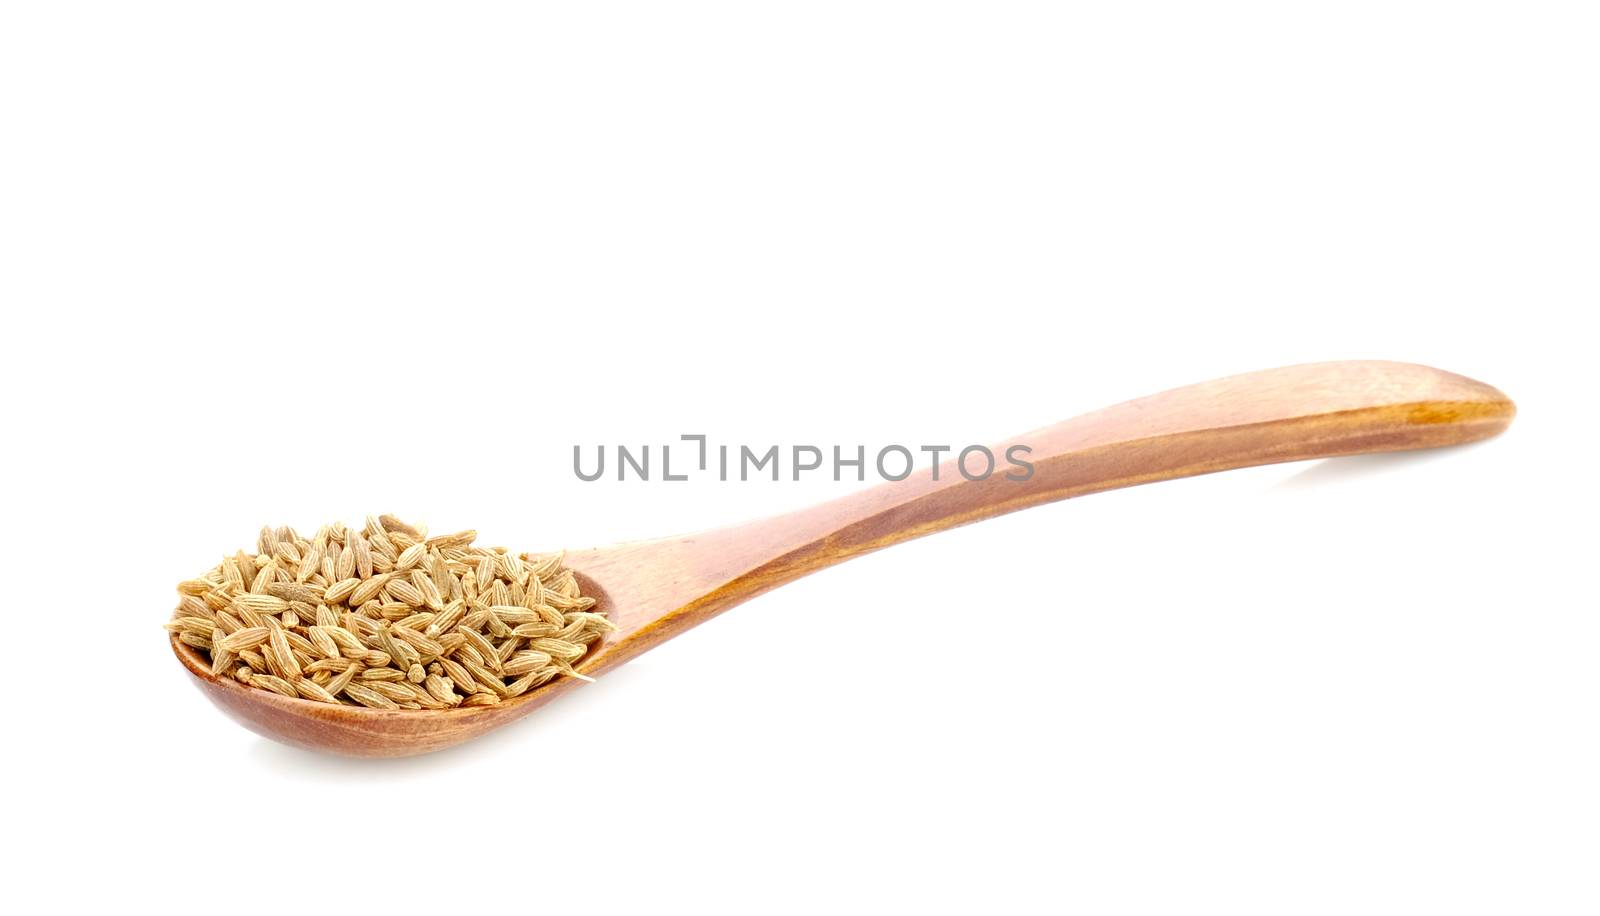 Cumin seeds in wood spoon on white background.